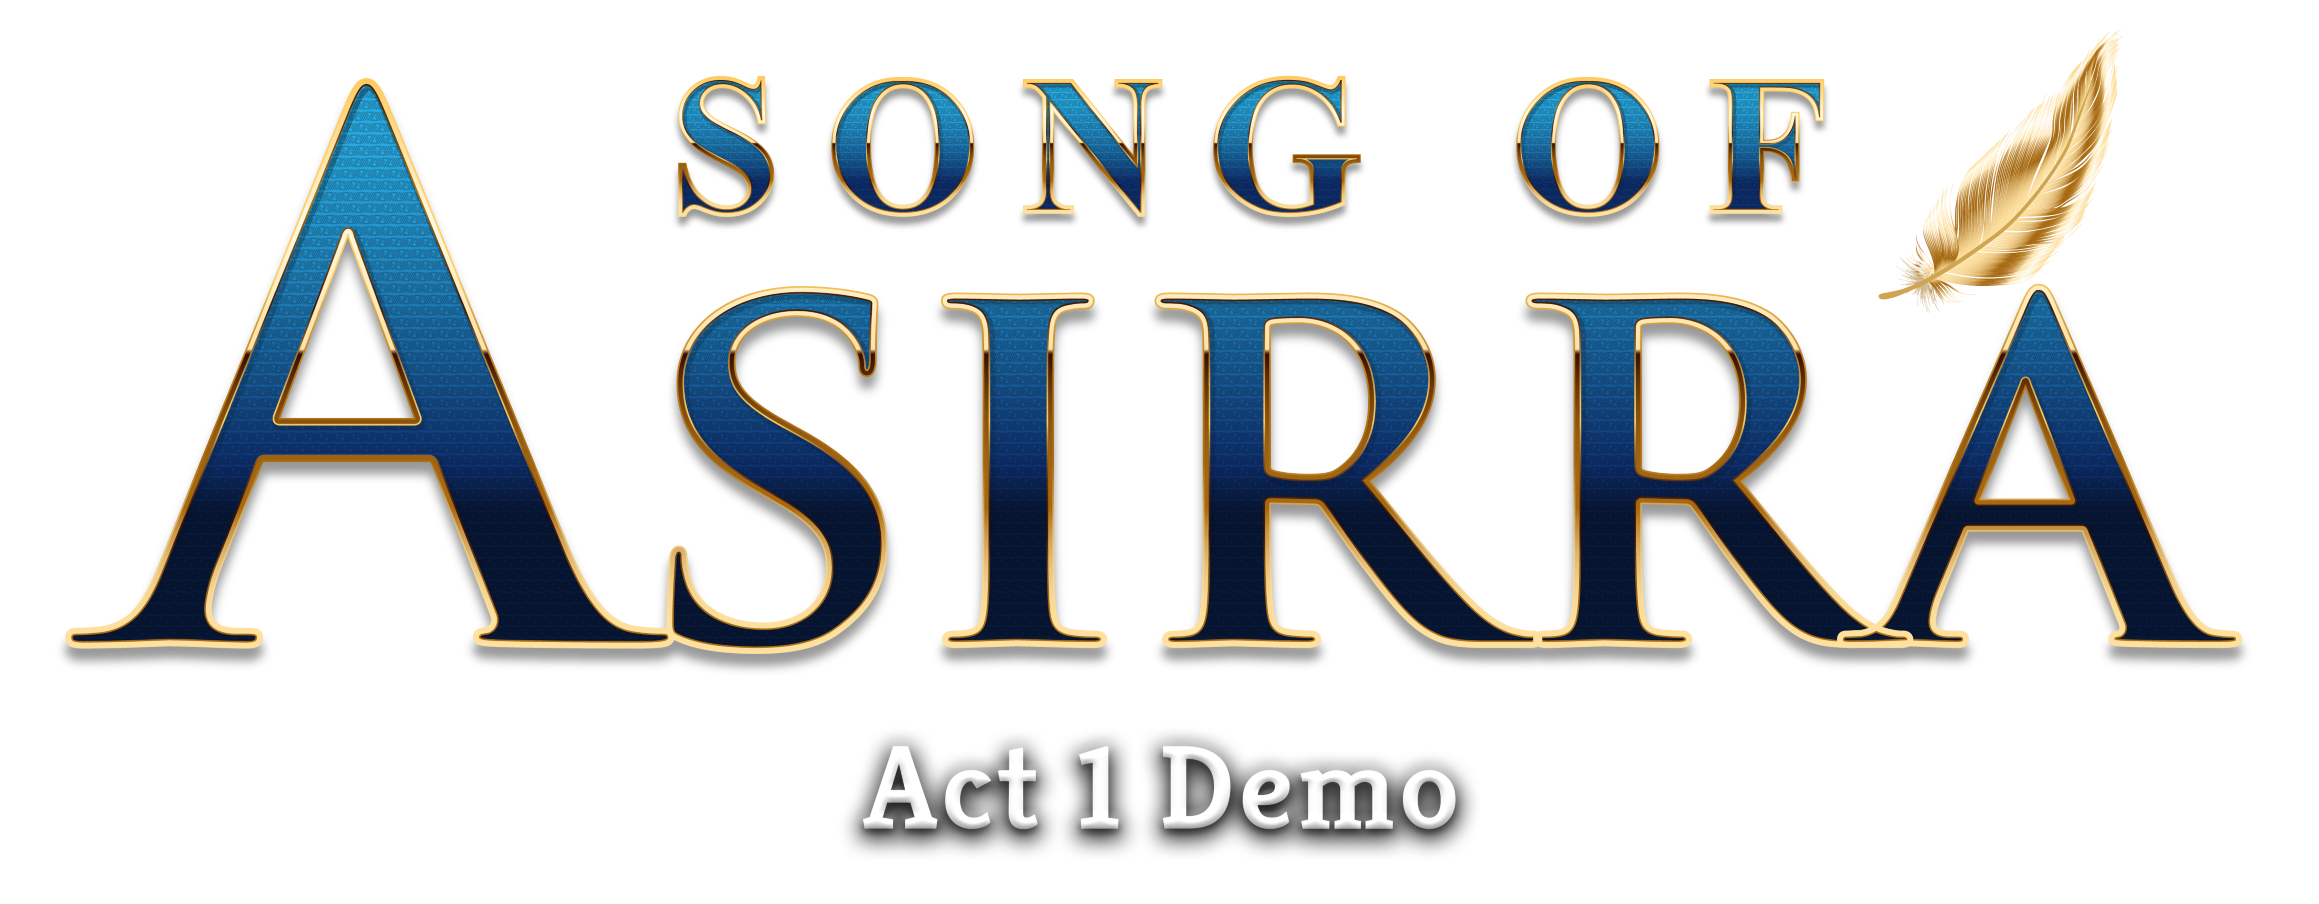 Song of Asirra - Act 1 Demo